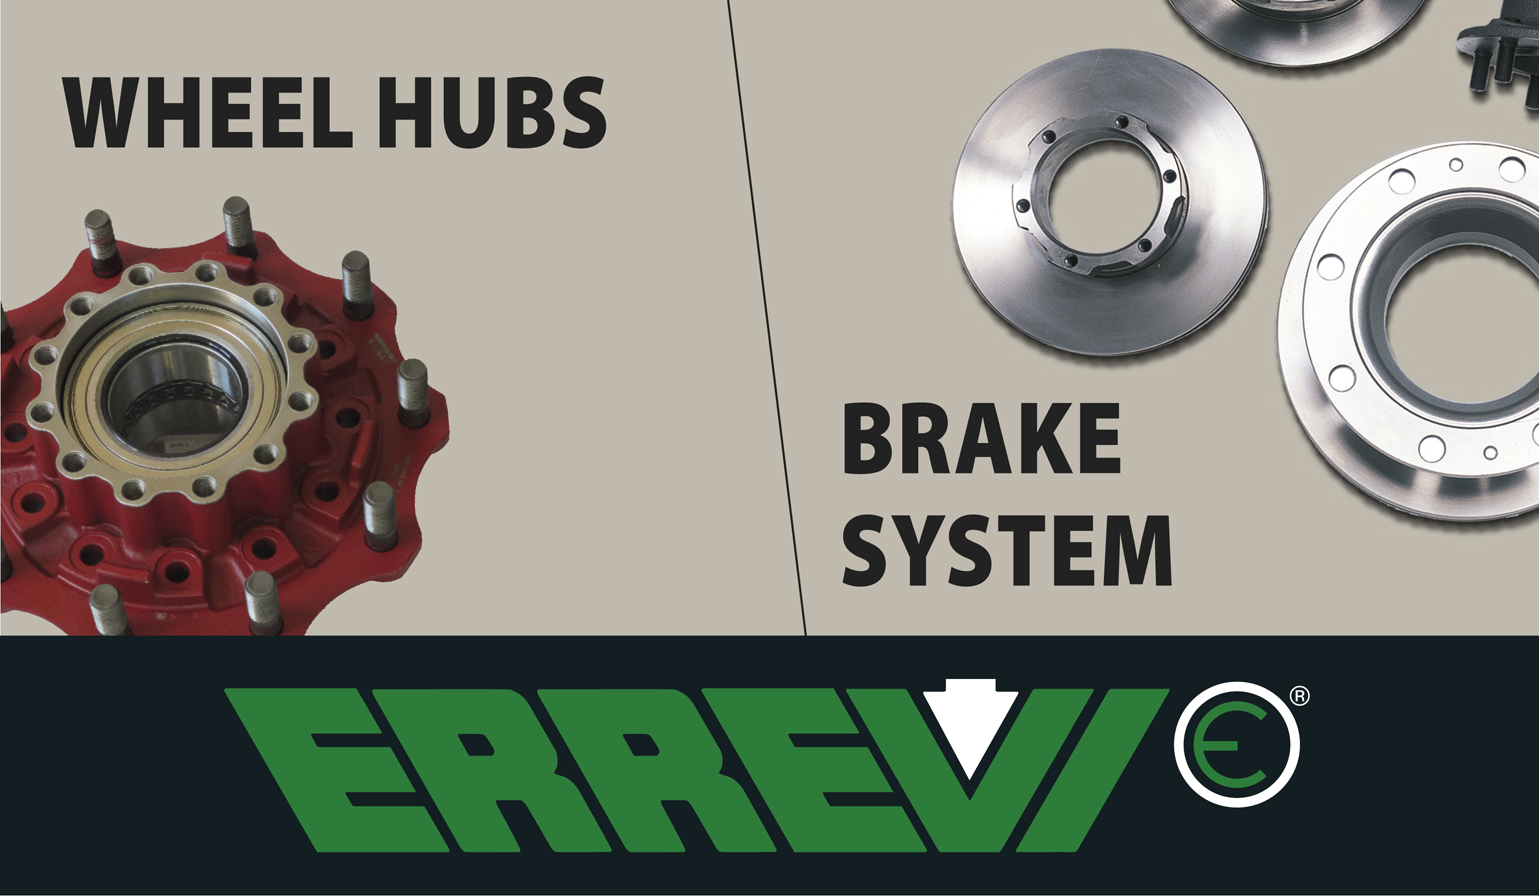 NEW CATALOGUES: WHEEL HUBS AND BRAKE SYSTEM